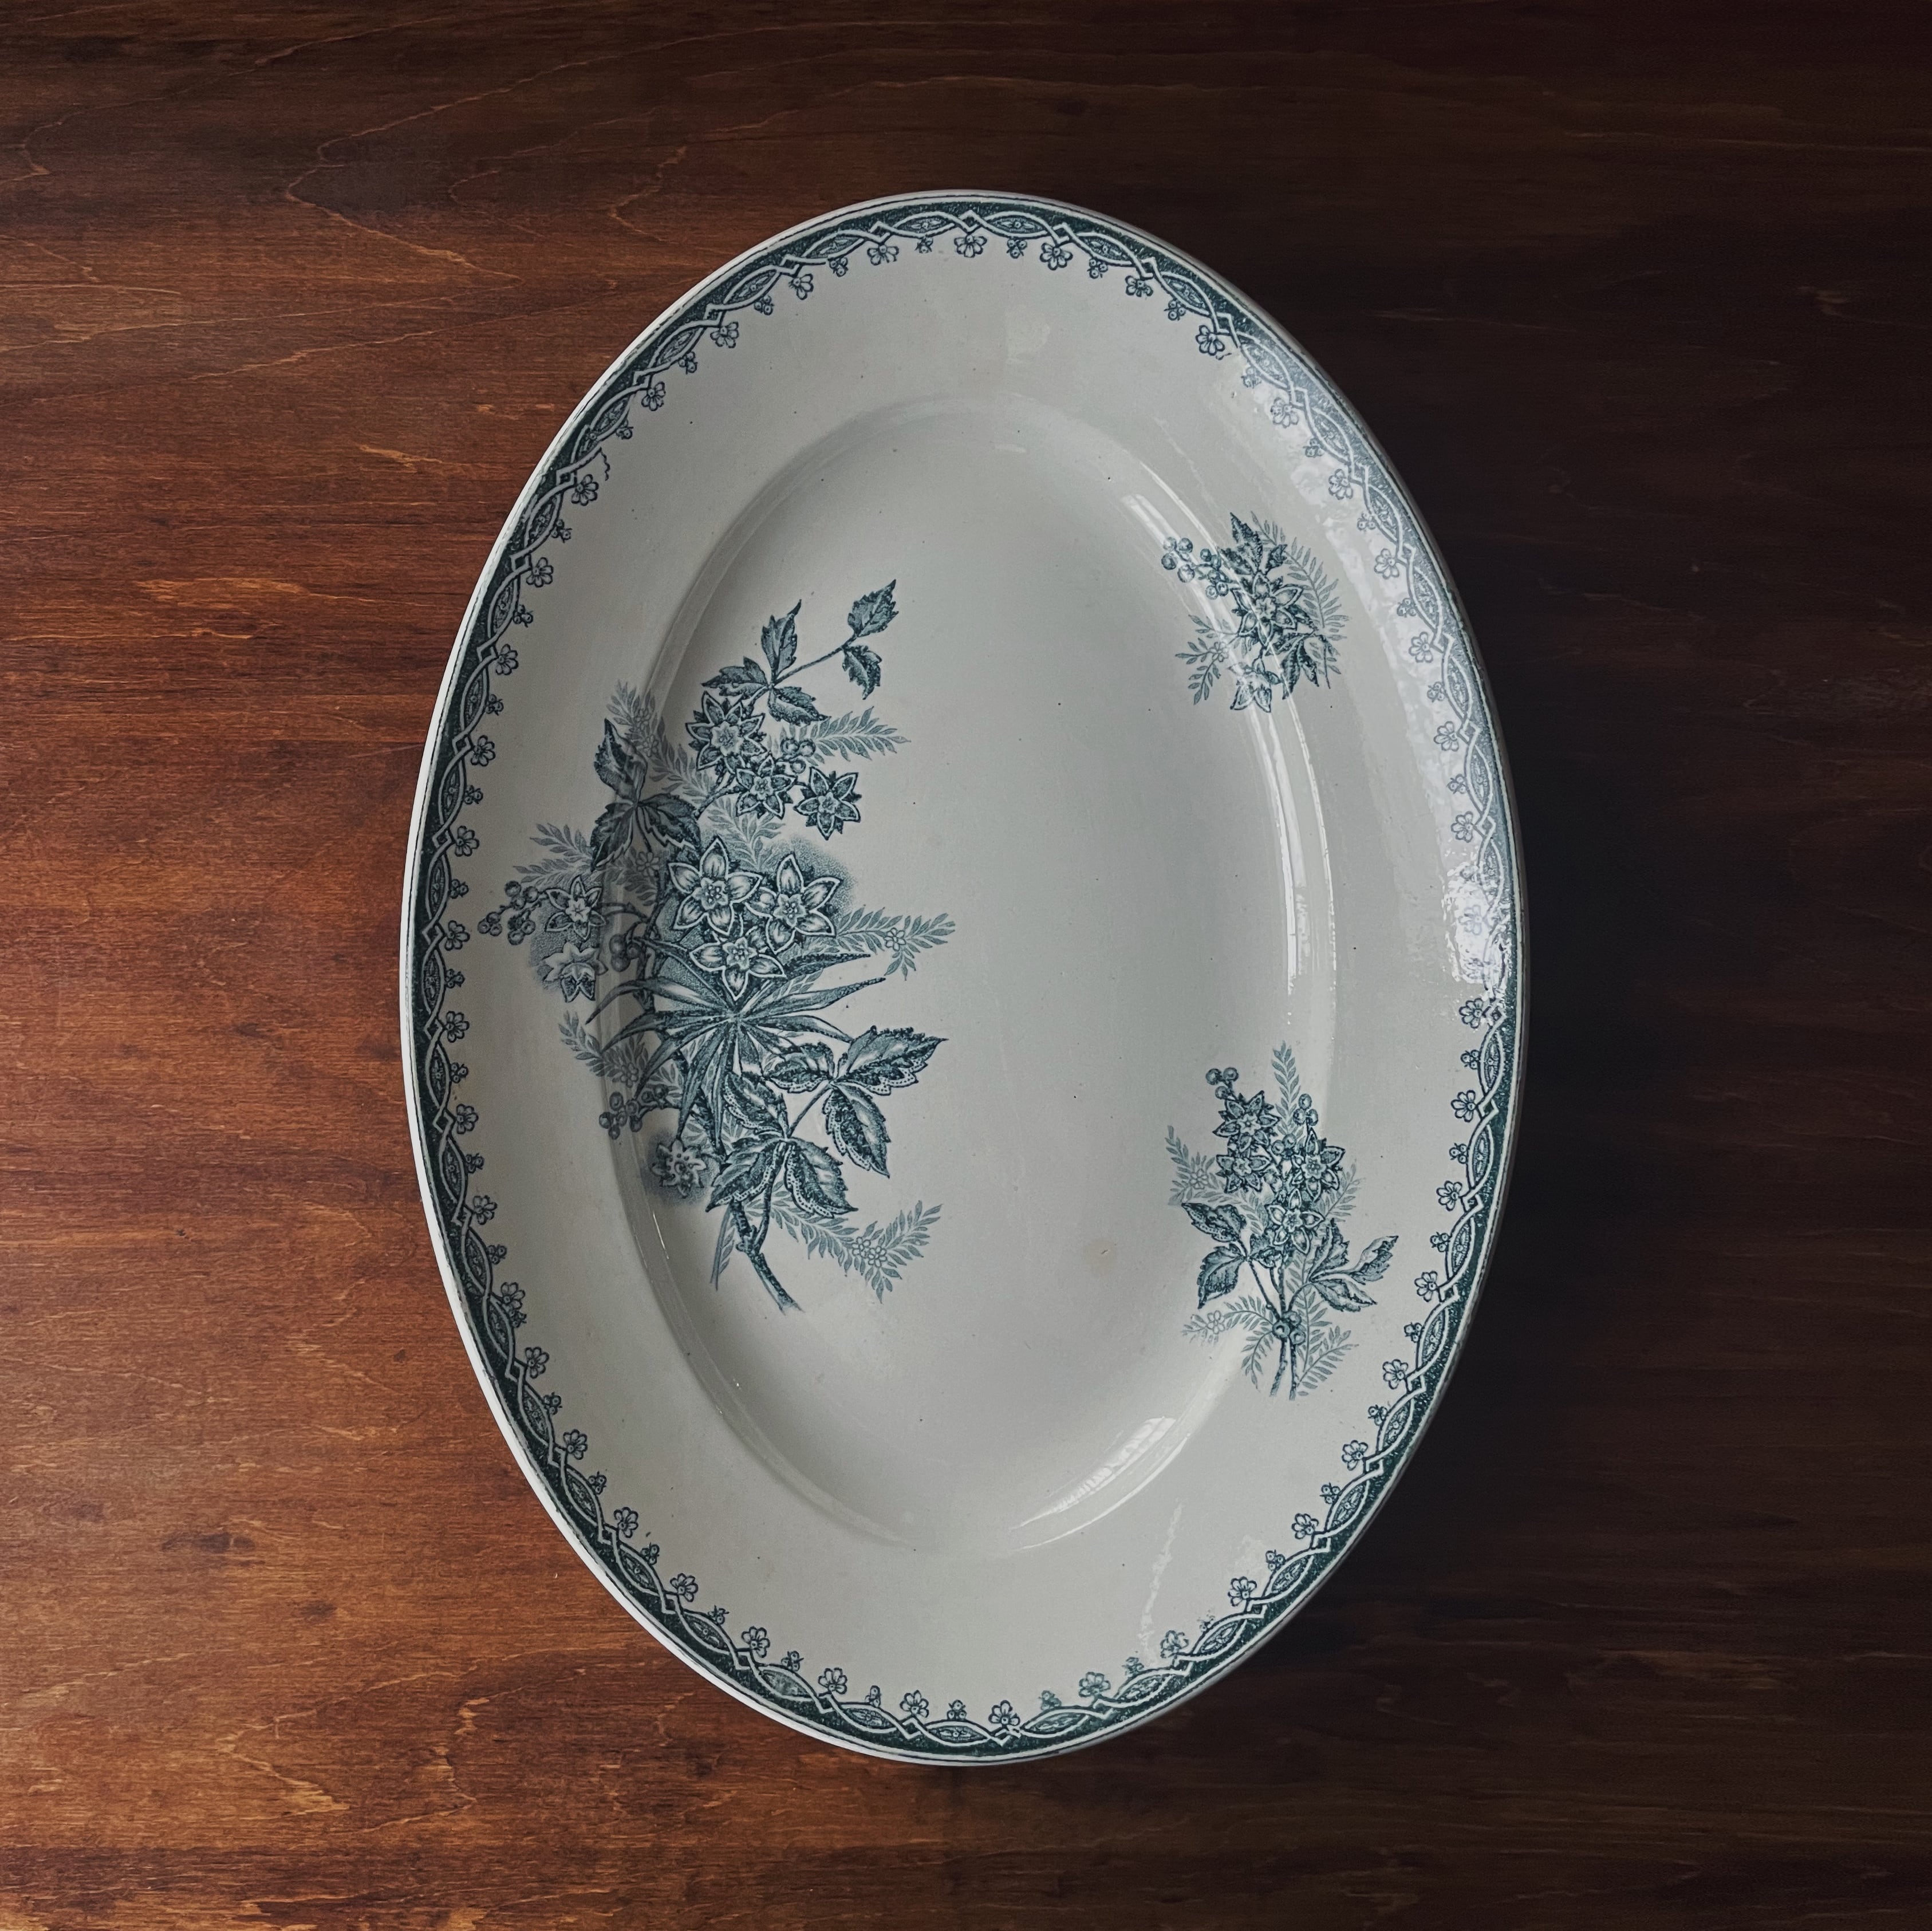 St. Amand "MARGOT" oval plate